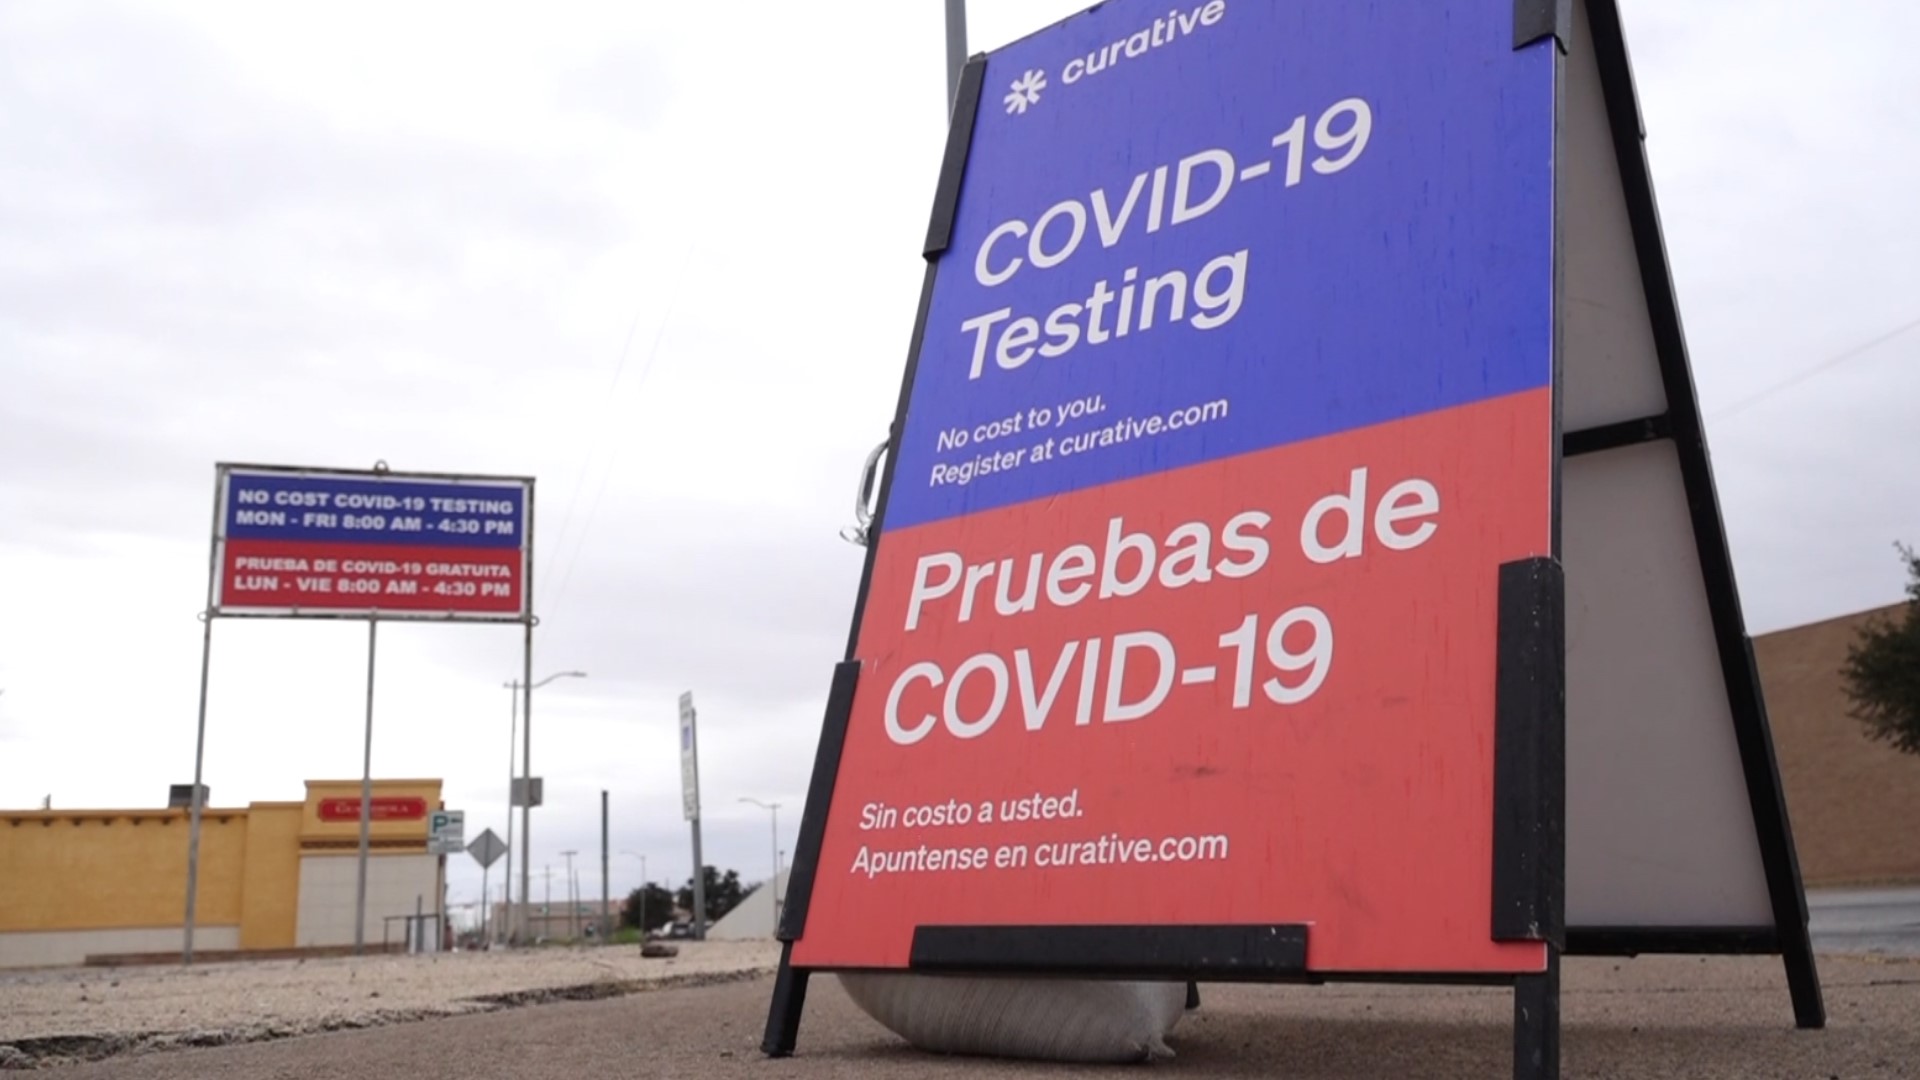 About a month ago, City of Odessa Incident Command partnered with Curative to offer COVID-19 PCR tests. An increase in daily testing has been seen since then.